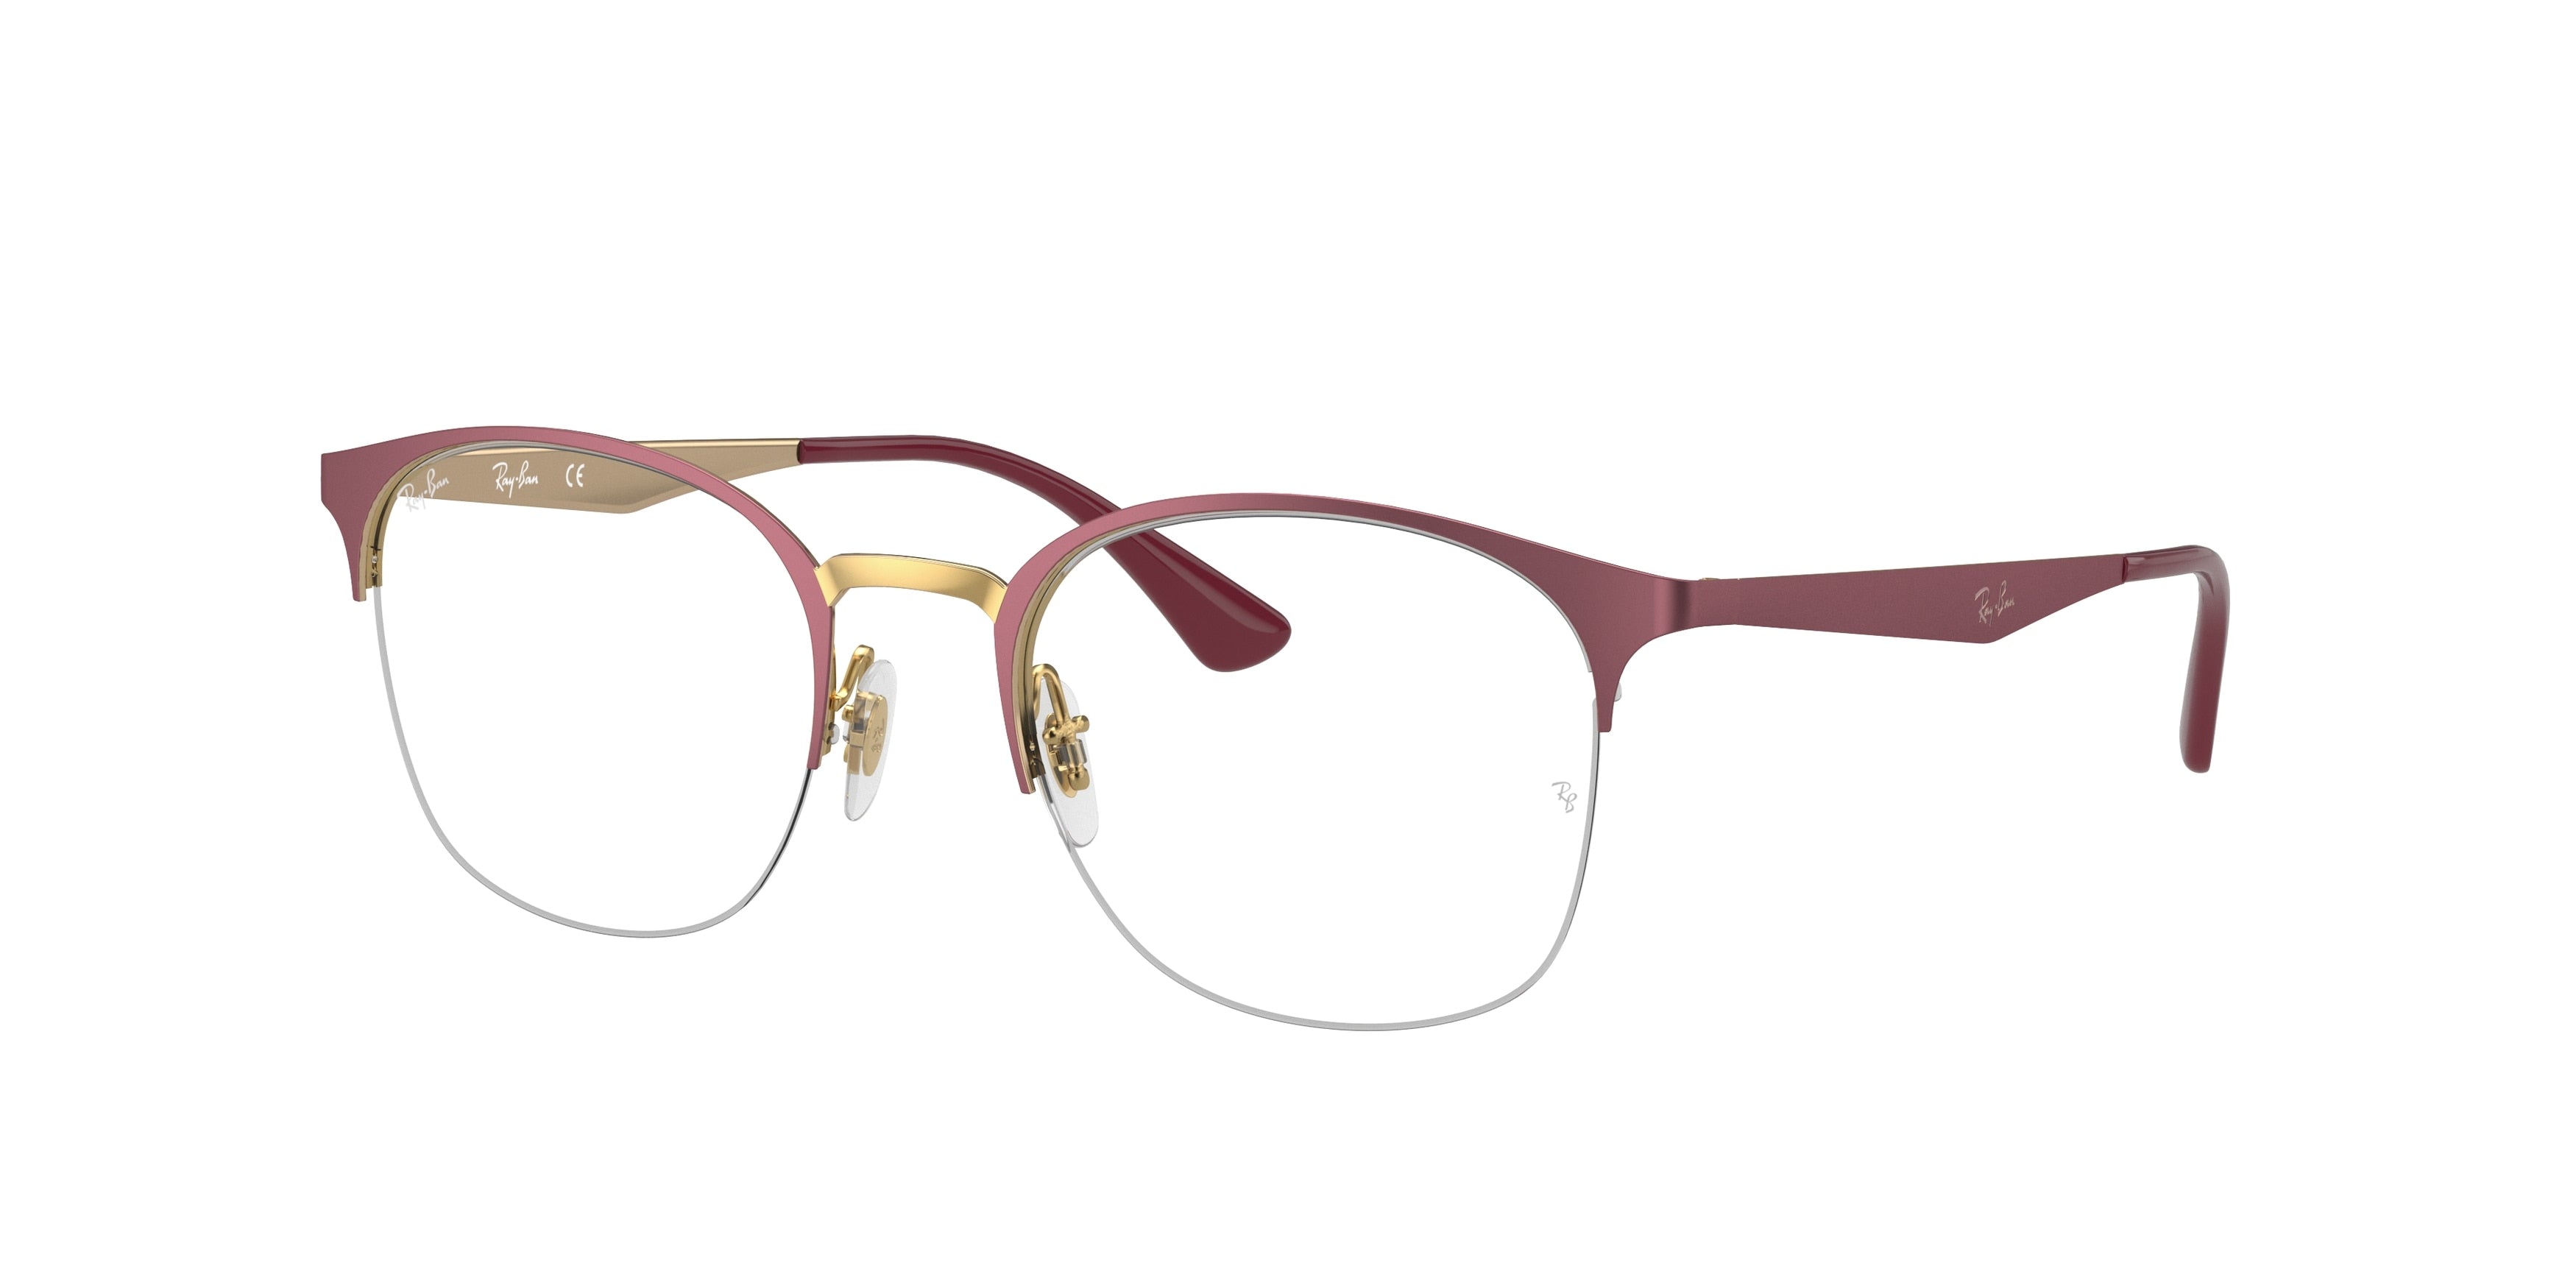 Ray-Ban Optical RX6422 Phantos Eyeglasses  3007-Bordeaux On Rose Gold 51-140-19 - Color Map Red